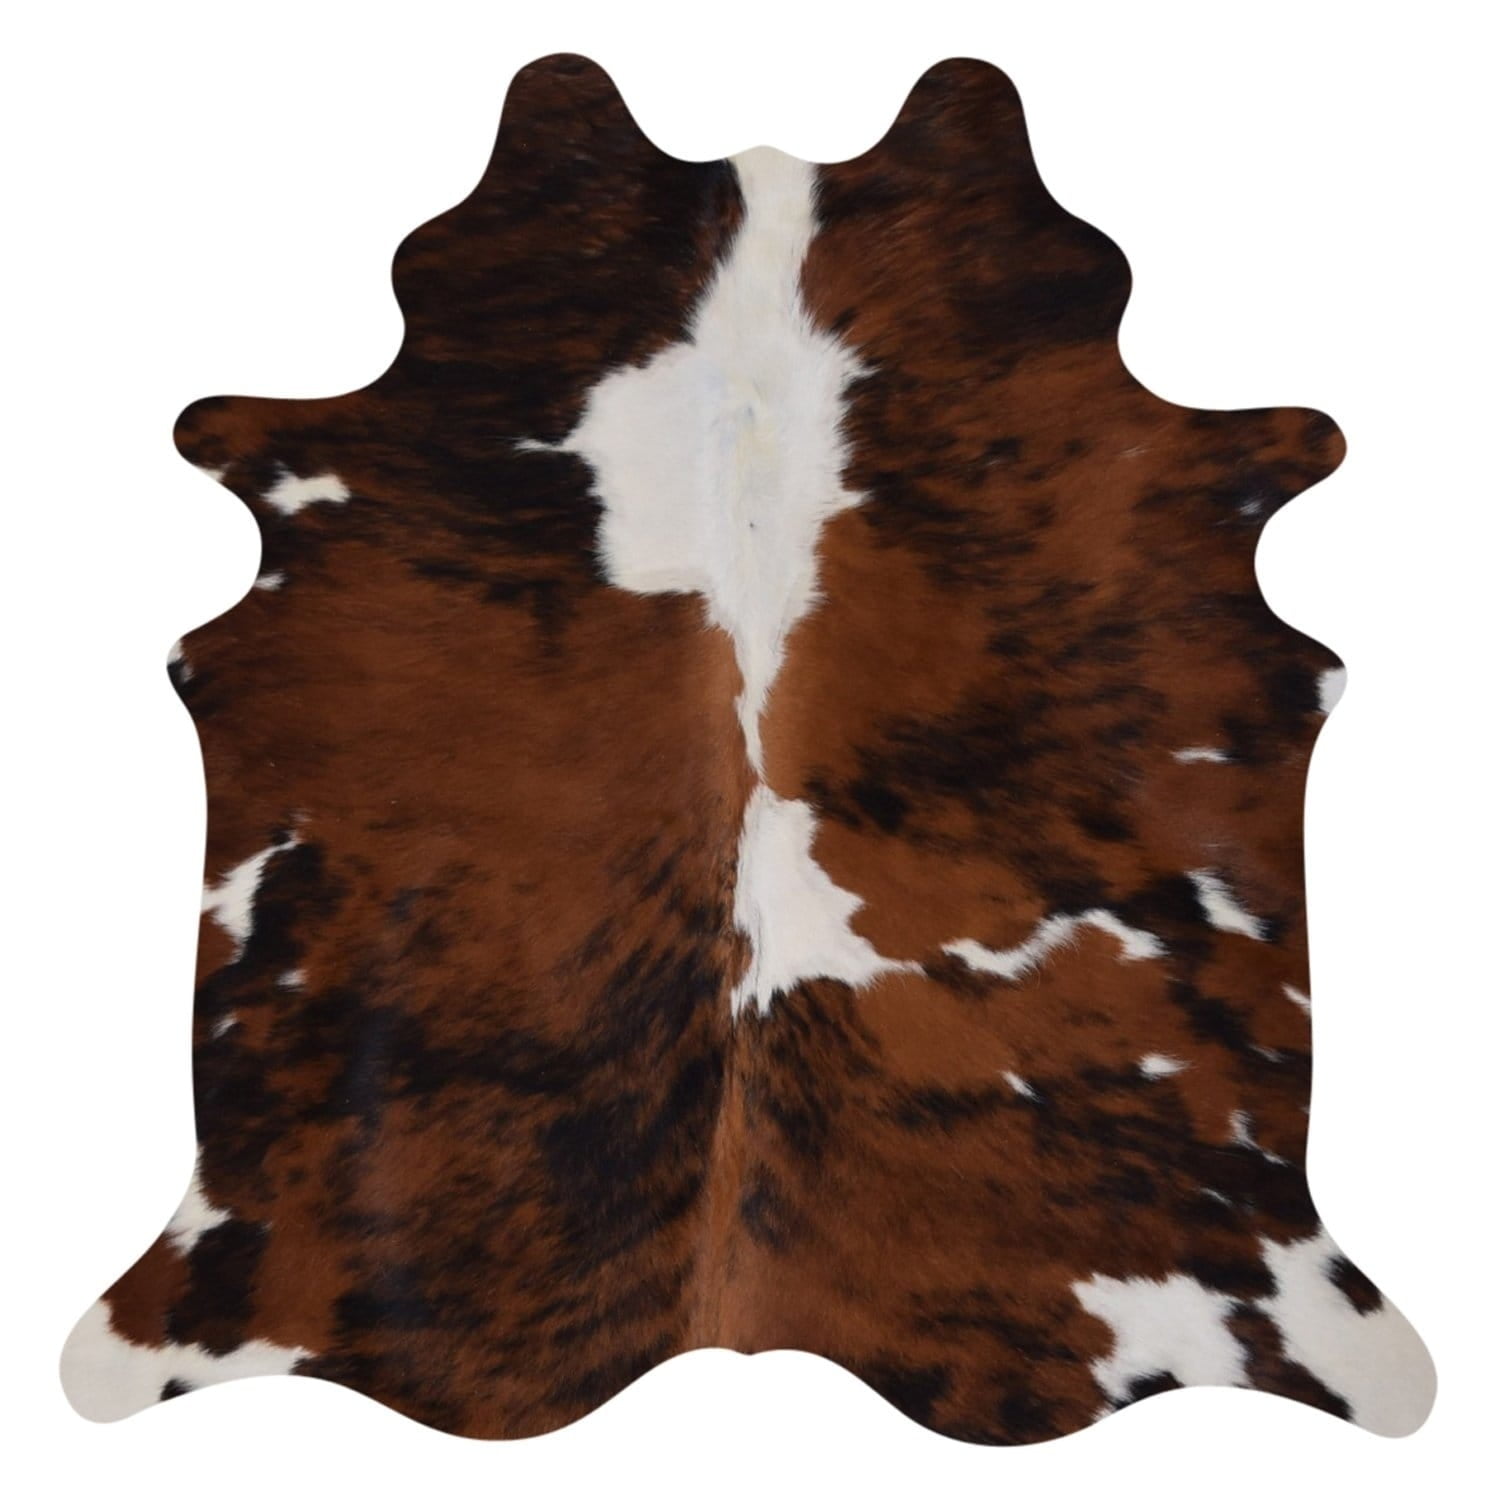 New COWHIDE RUG BRINDLE TRICOLOR 6'x7' APPROX Cow Skin Rug Leather Cow Hide 